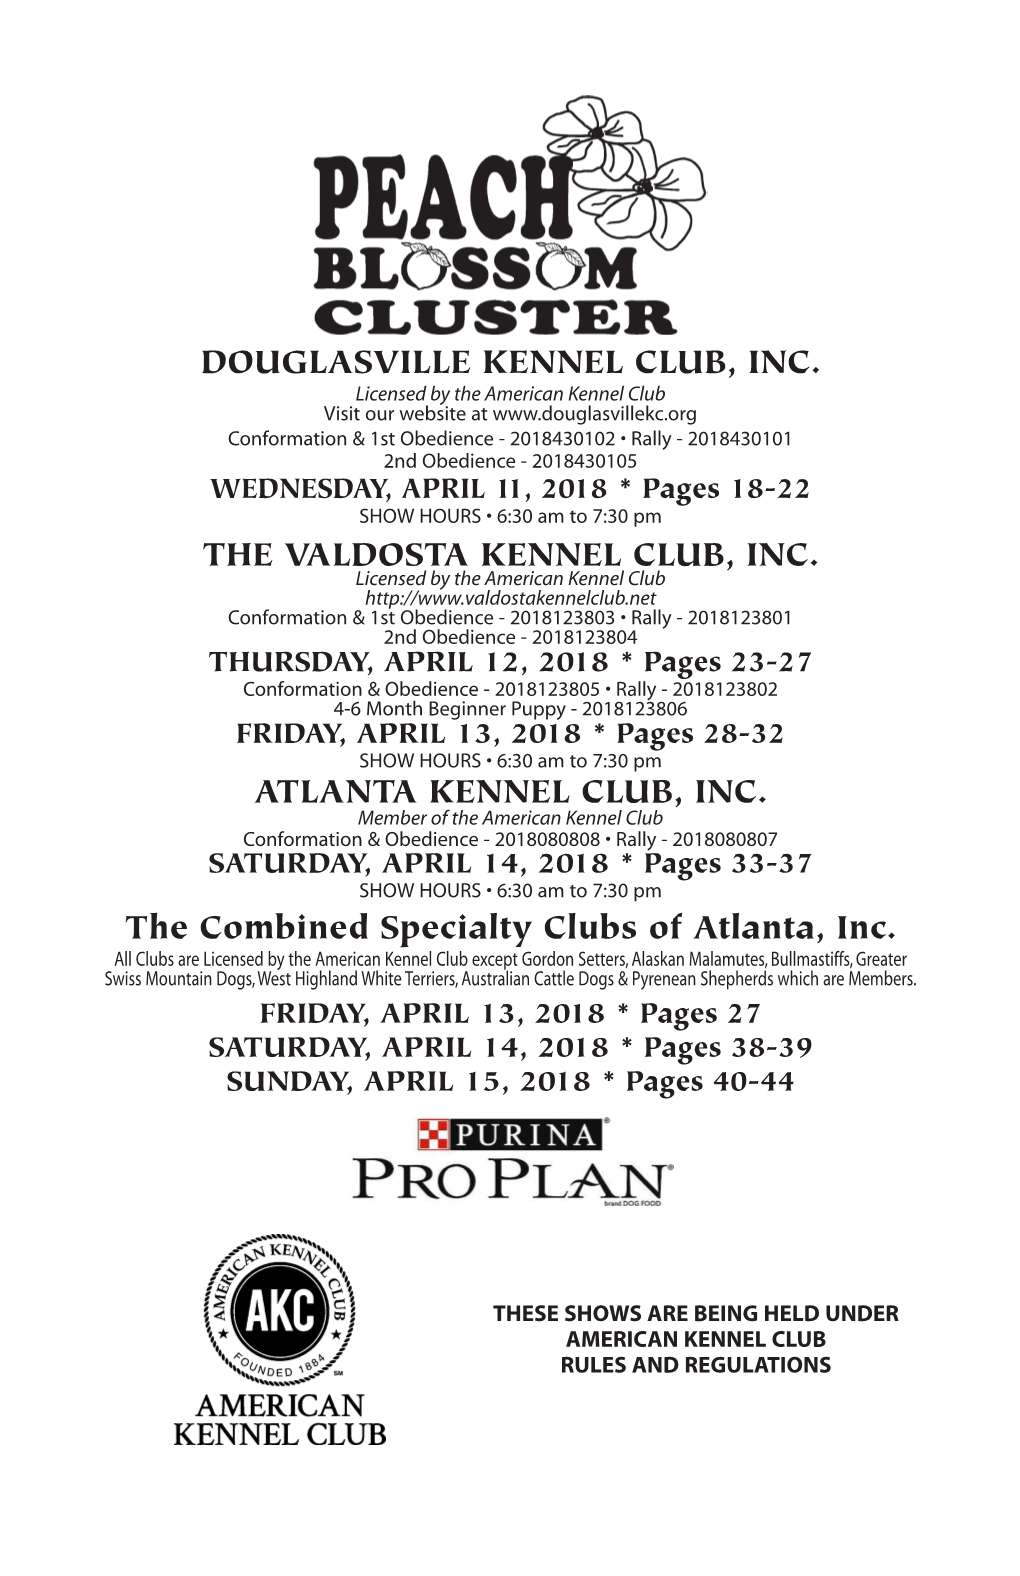 The Combined Specialty Clubs of Atlanta, Inc